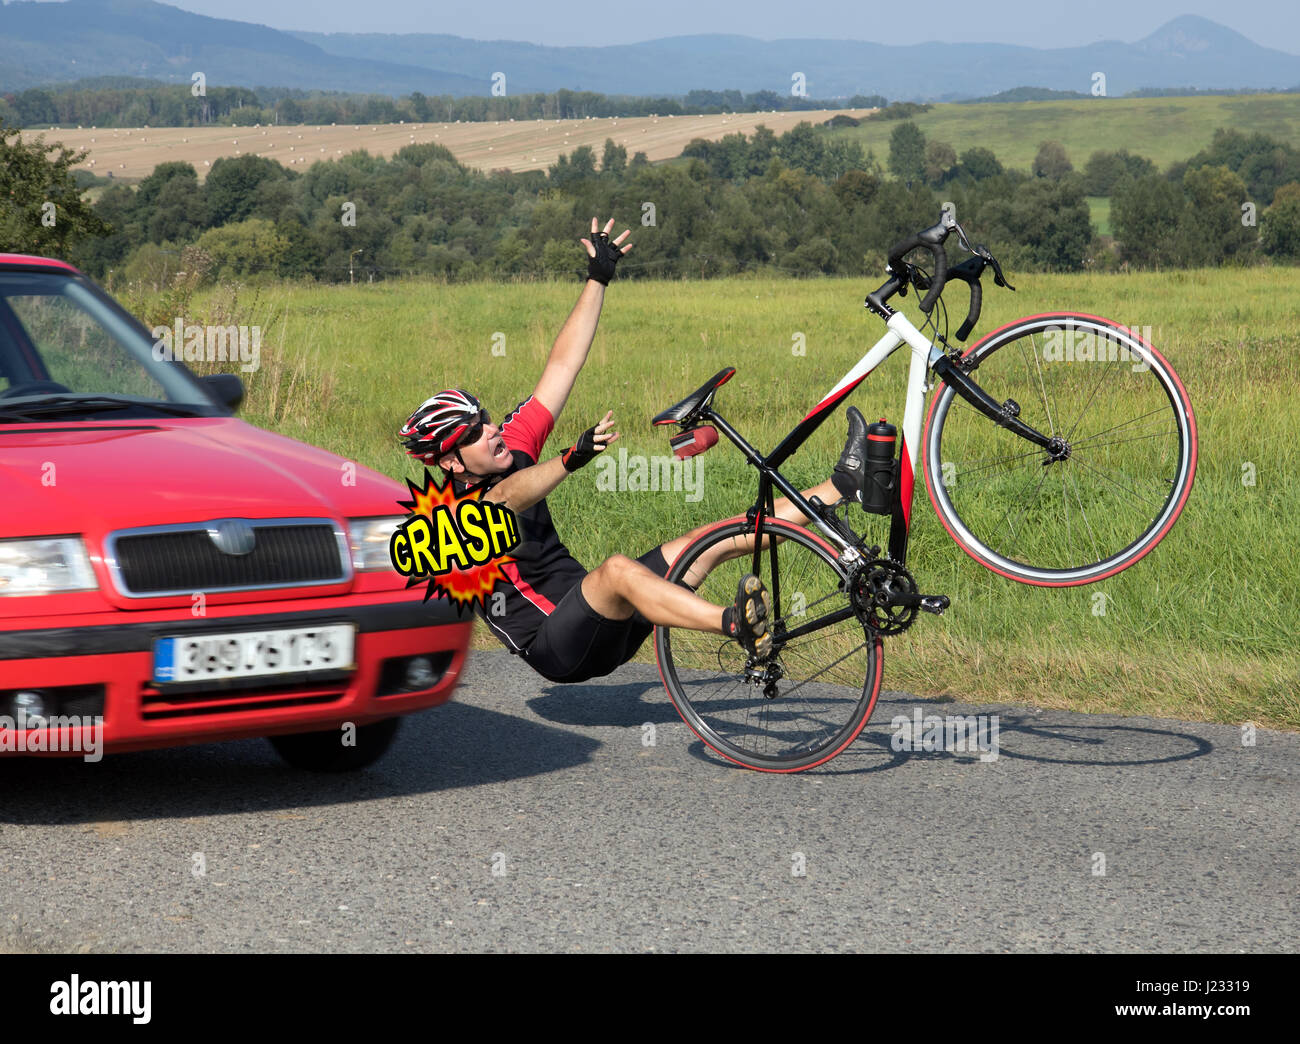 Accident cars with biker. Car collides cyclist on the road. Dangerous traffic on asphalt way on the countryside. Stock Photo